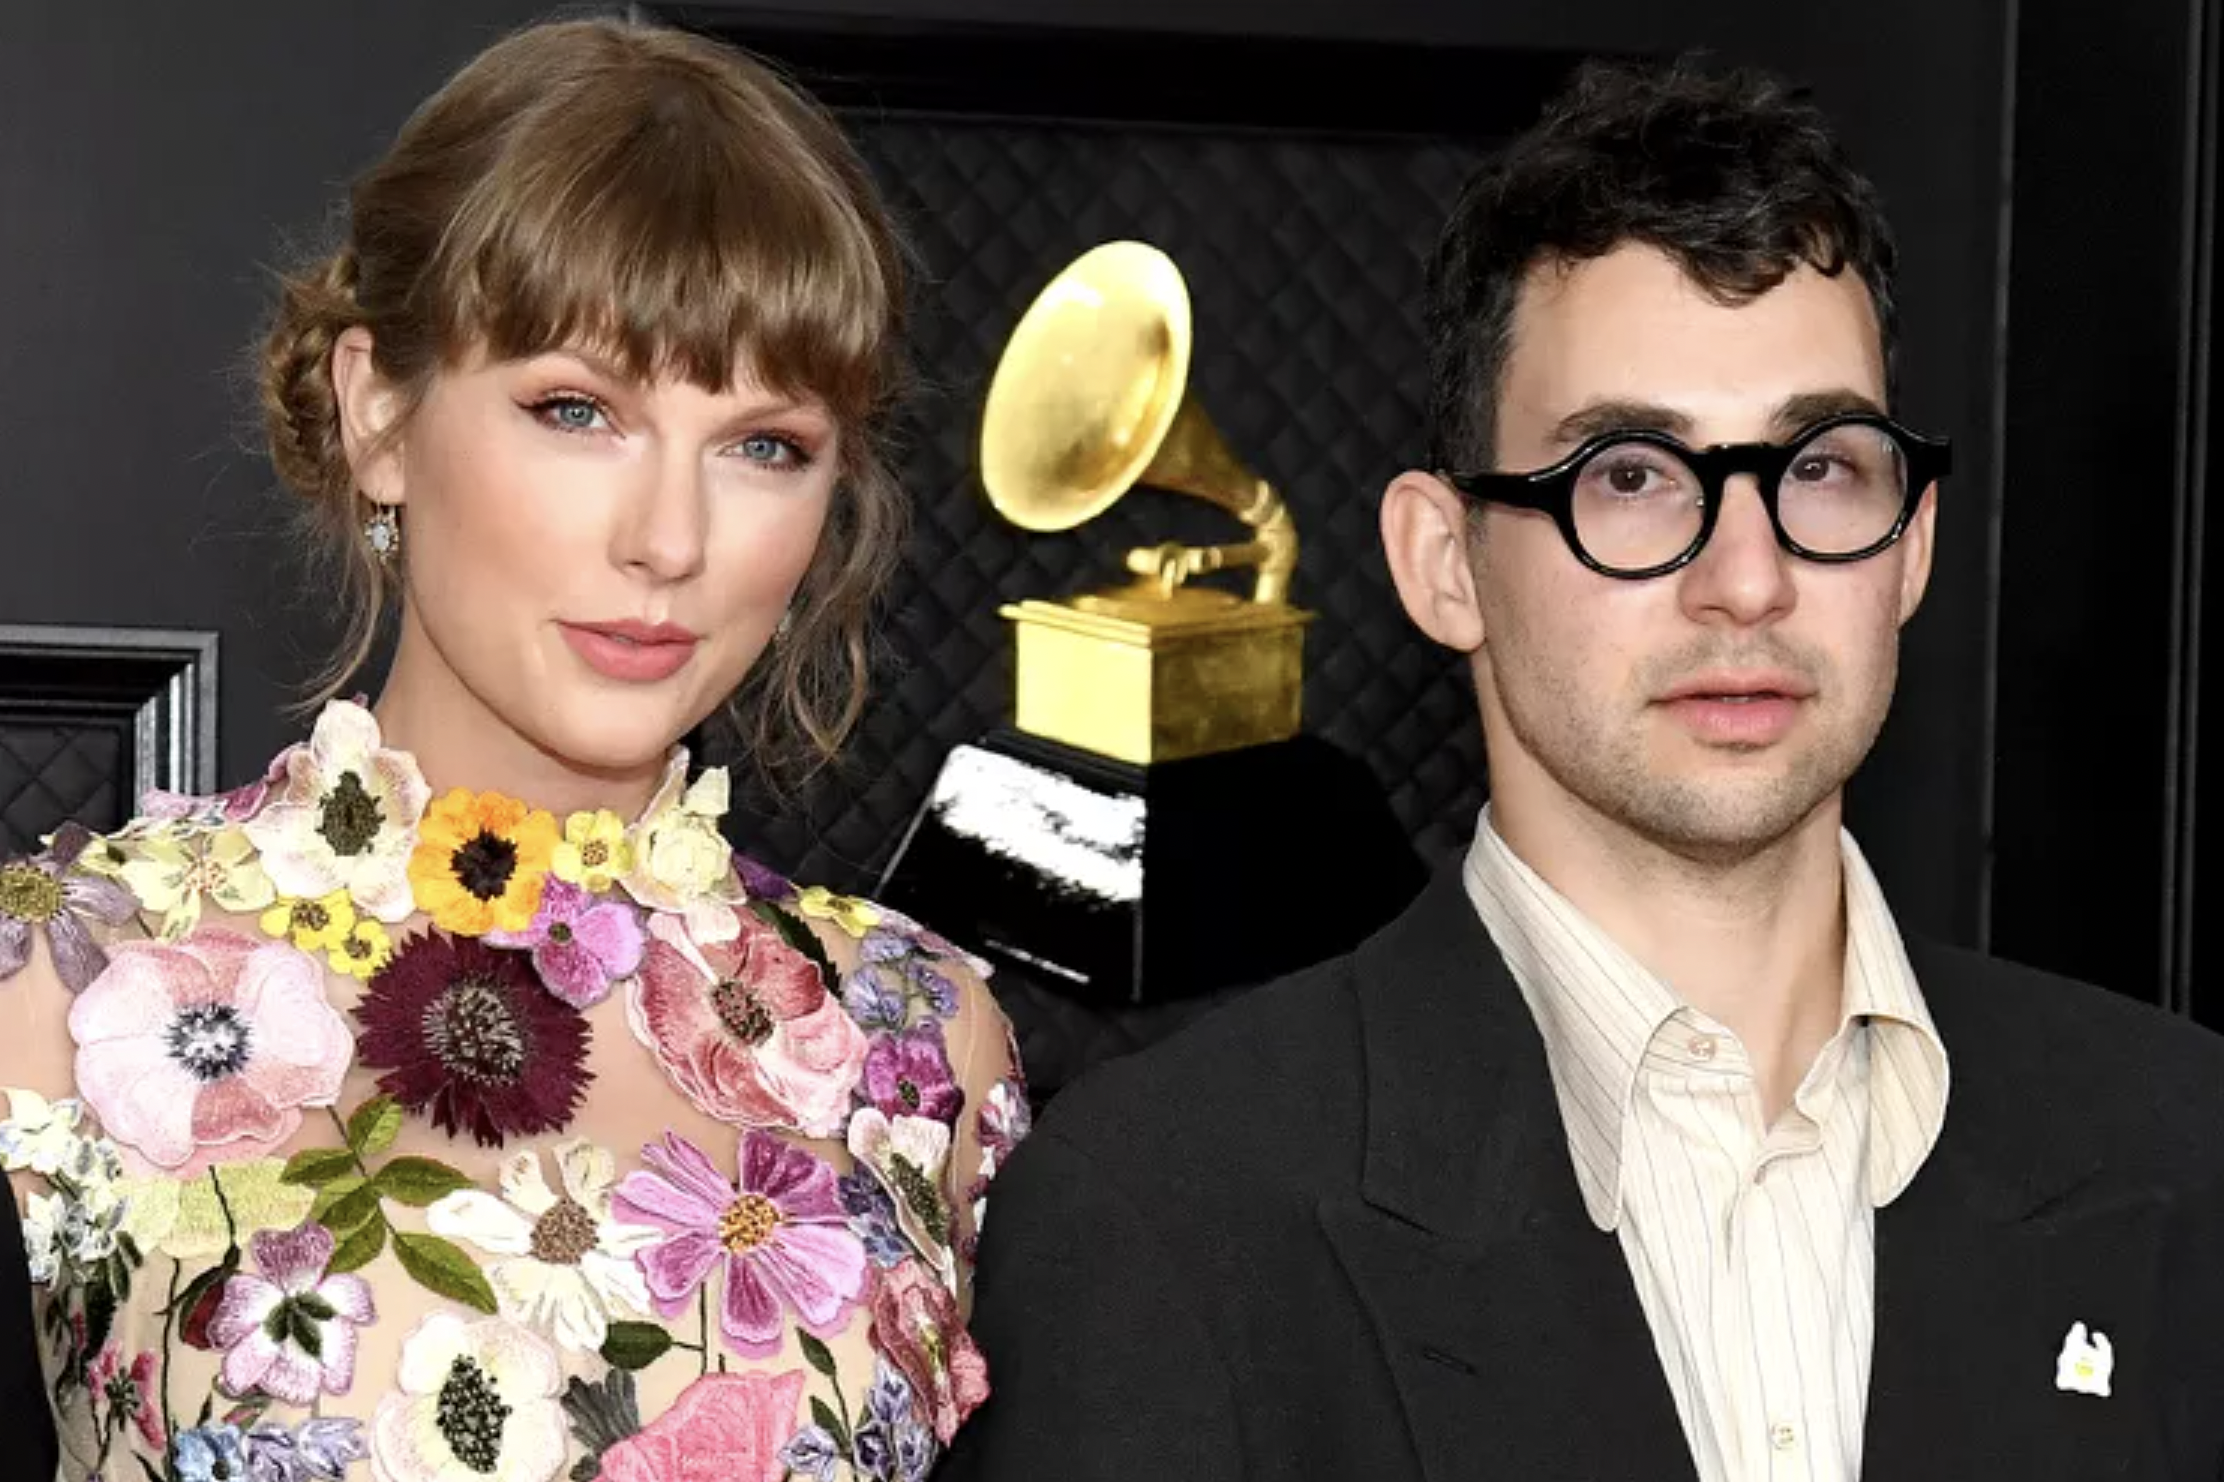 Taylor Swift (pictured left) and Jack Antonoff (pictured right) have been collaborating on music since 2014 (image courtesy: Getty Images)